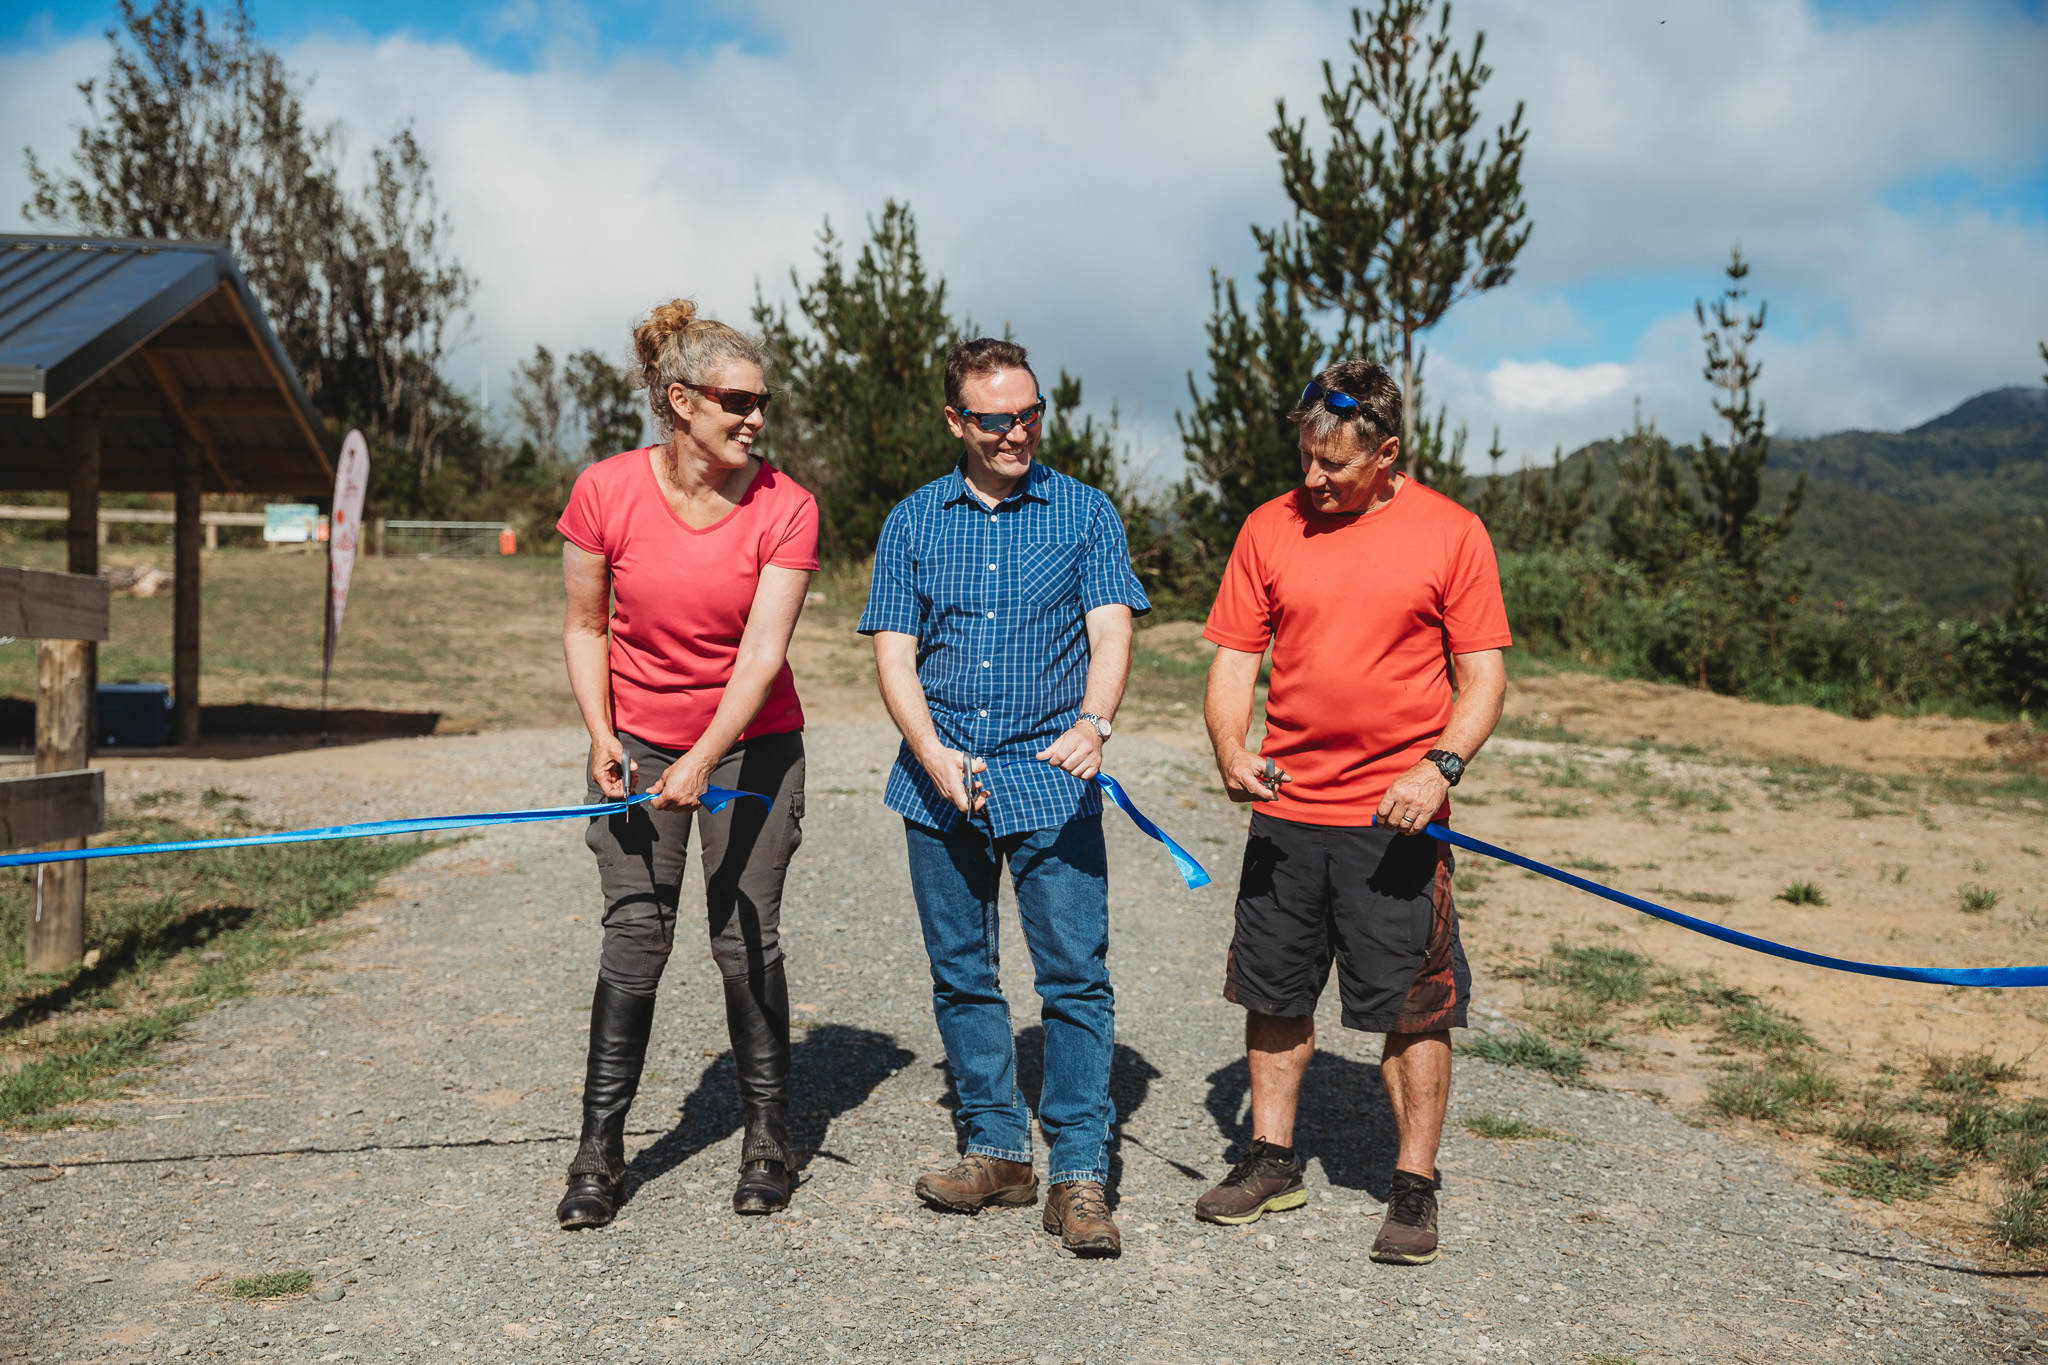 Waitekohekohe is officially open! The blue ribbon was cut by horse trail expert Kirstin Symes, Western Bay Mayor James Denyer and mountain biking lead Damon McLachlan. 